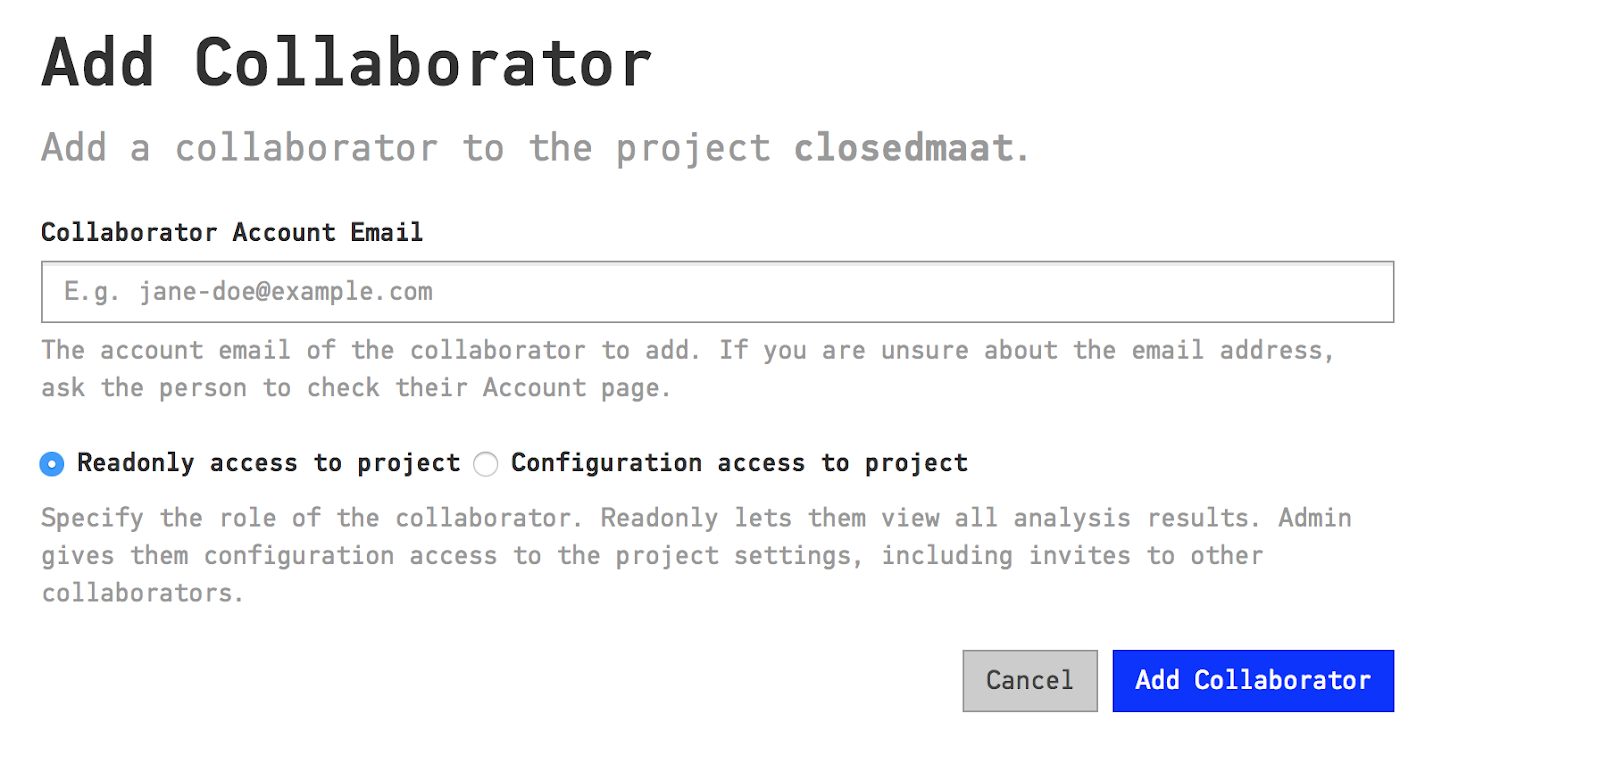 Add a collaborator by providing his email address and access level.